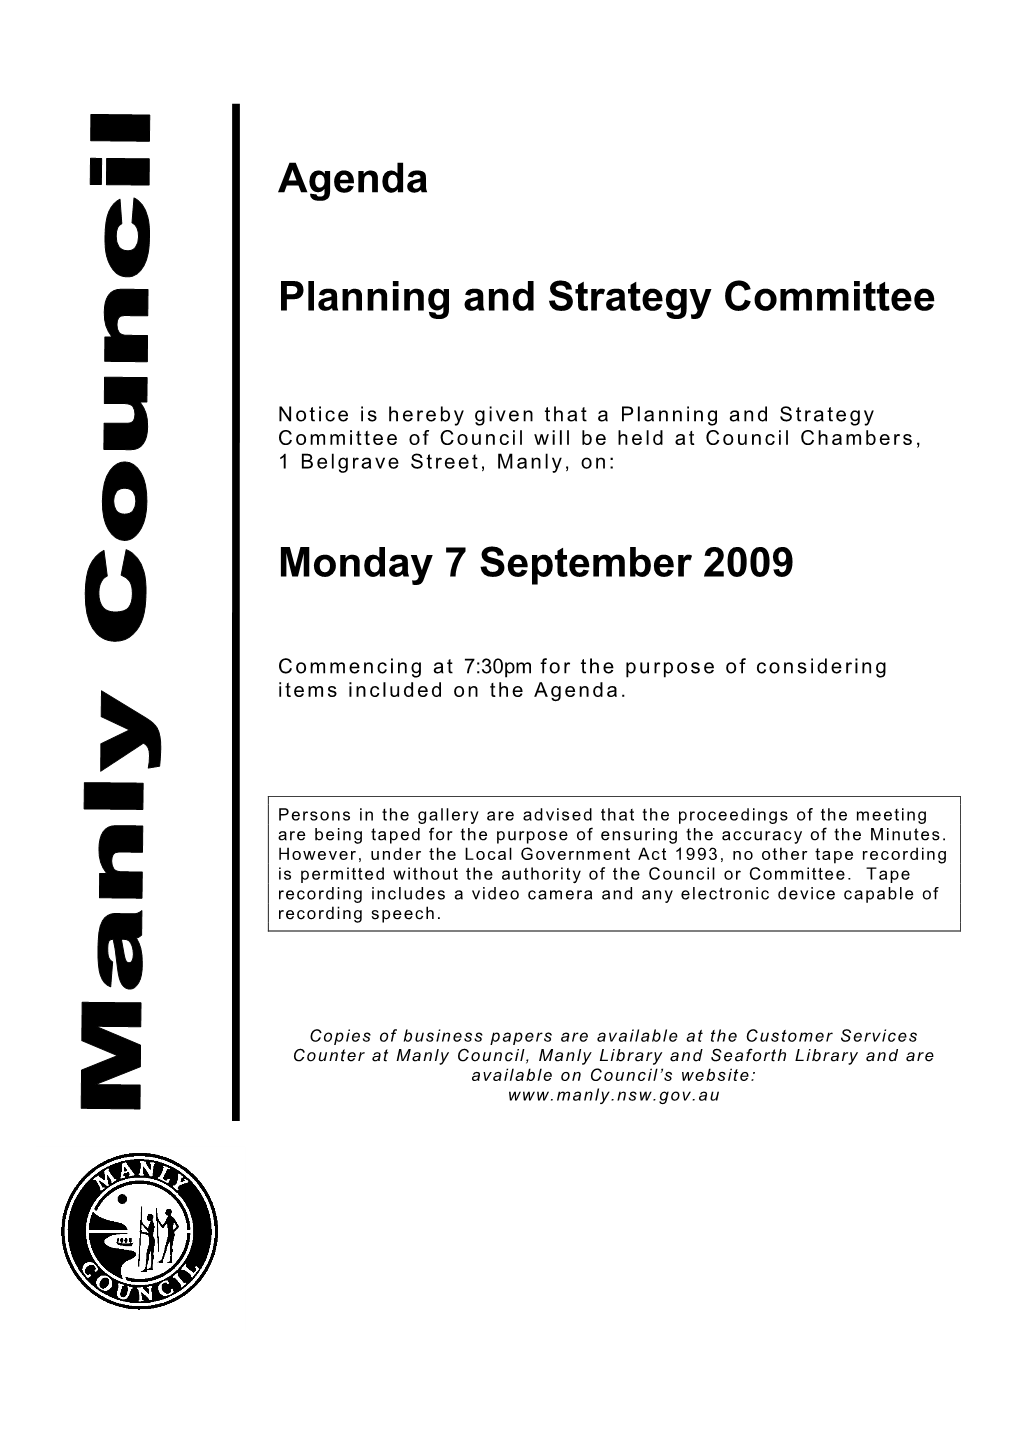 Agenda of Planning and Strategy Committee